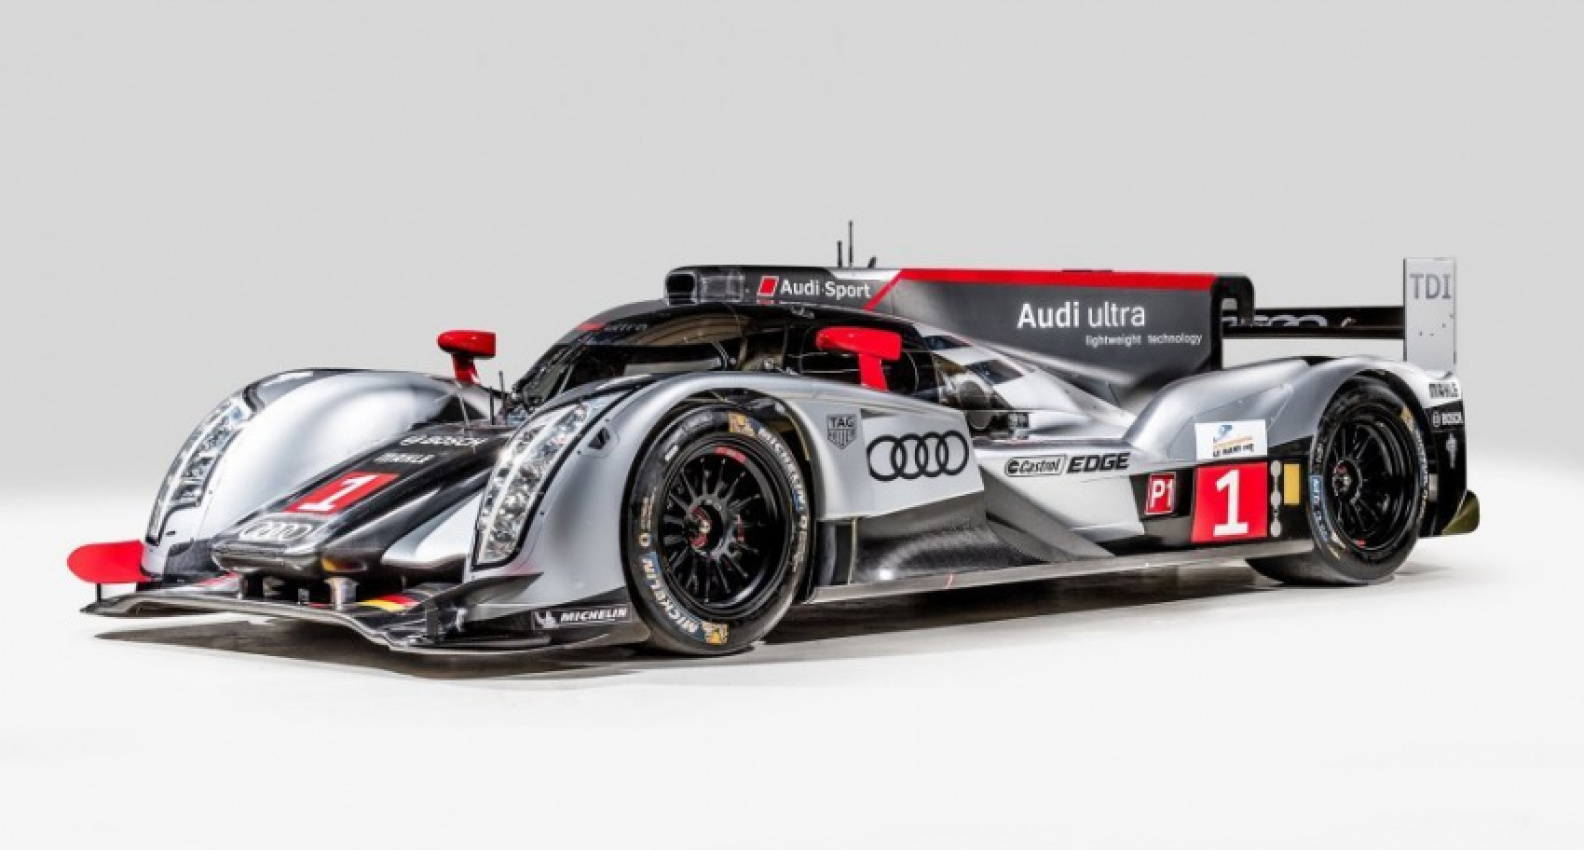 audi, autos, cars, this race-ready audi r18 tdi just wants to be taken to the track